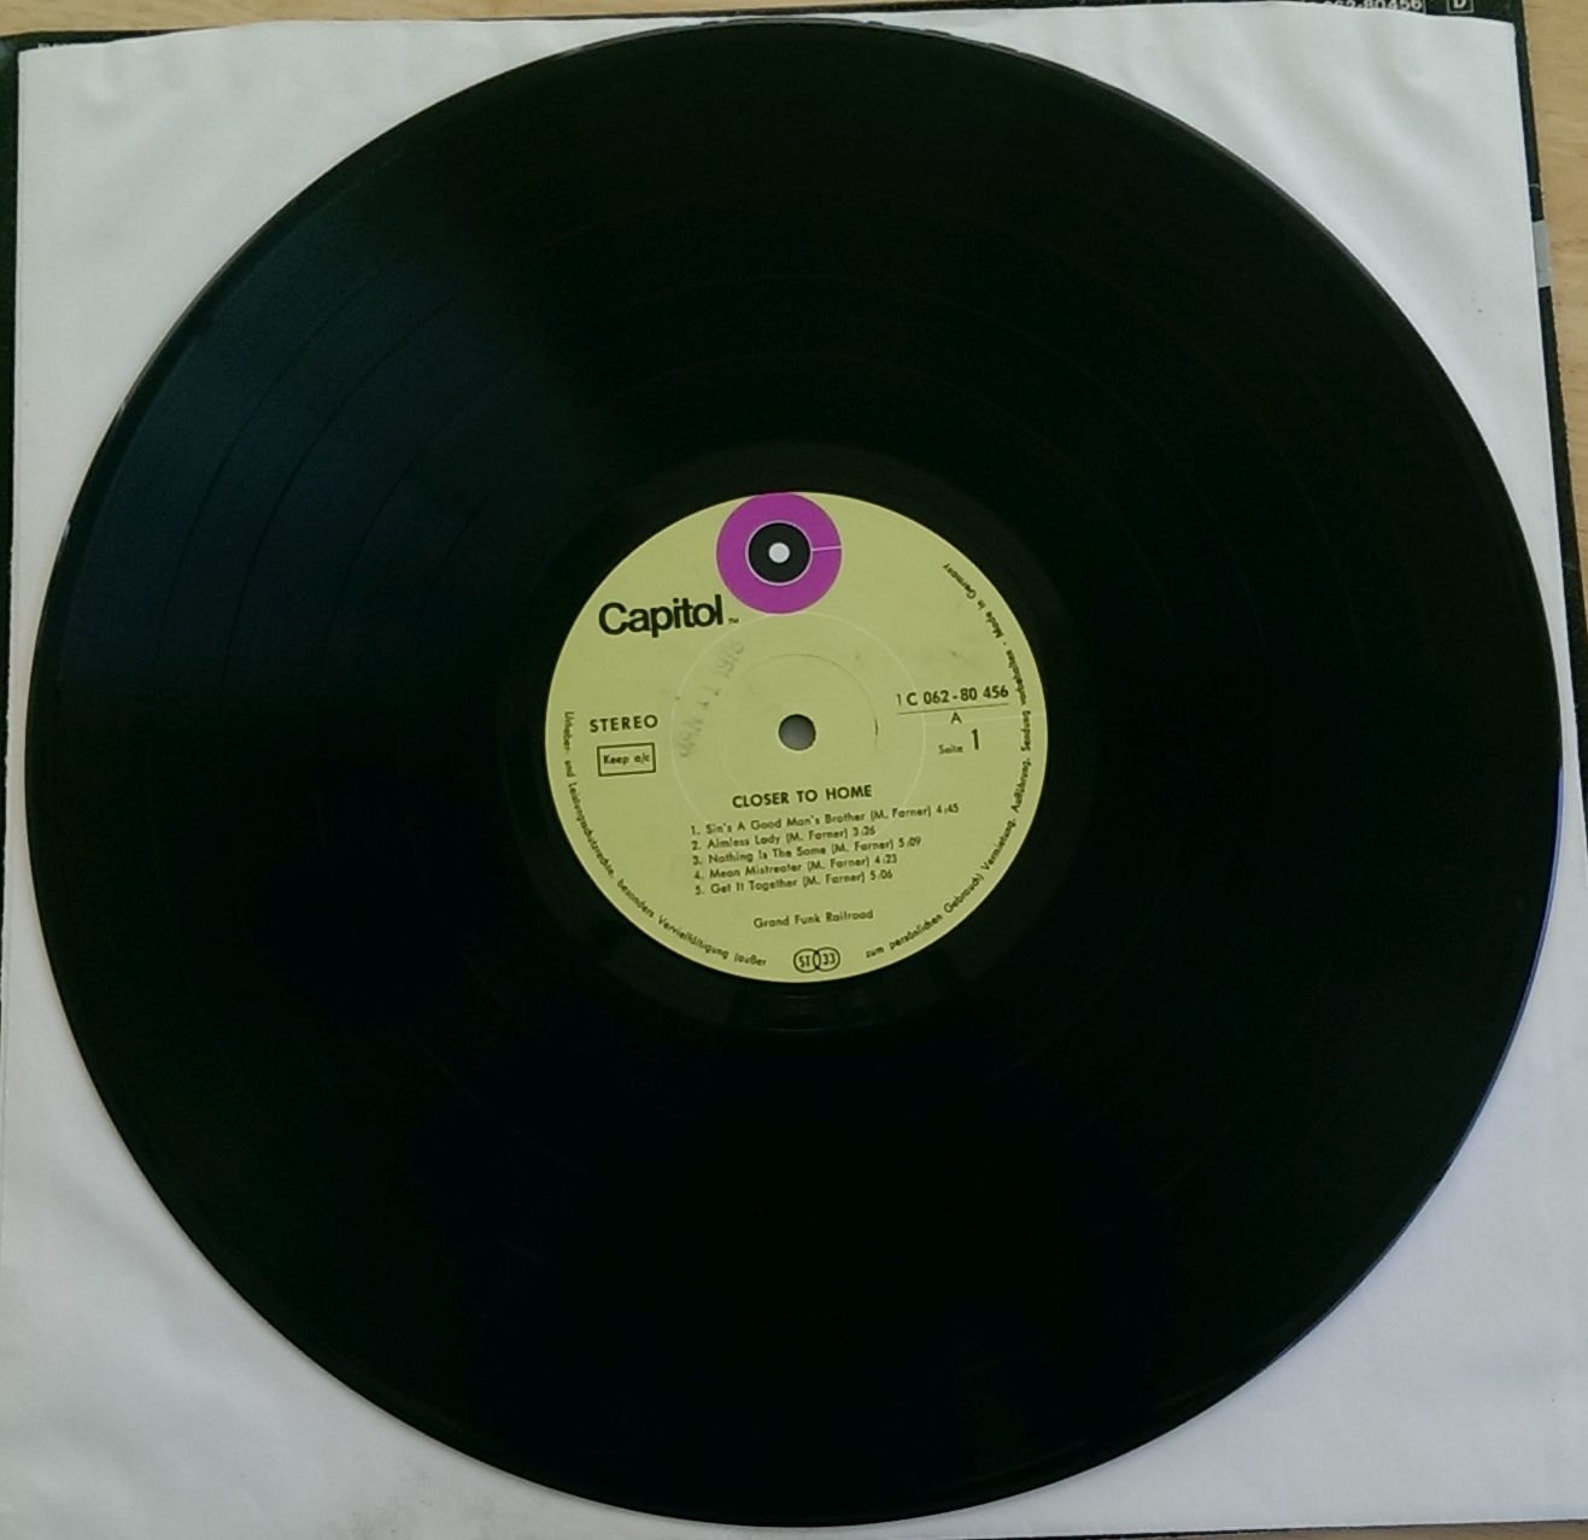 Grand Funk Closer to Home 1 C 062-80456 1970 German - Etsy